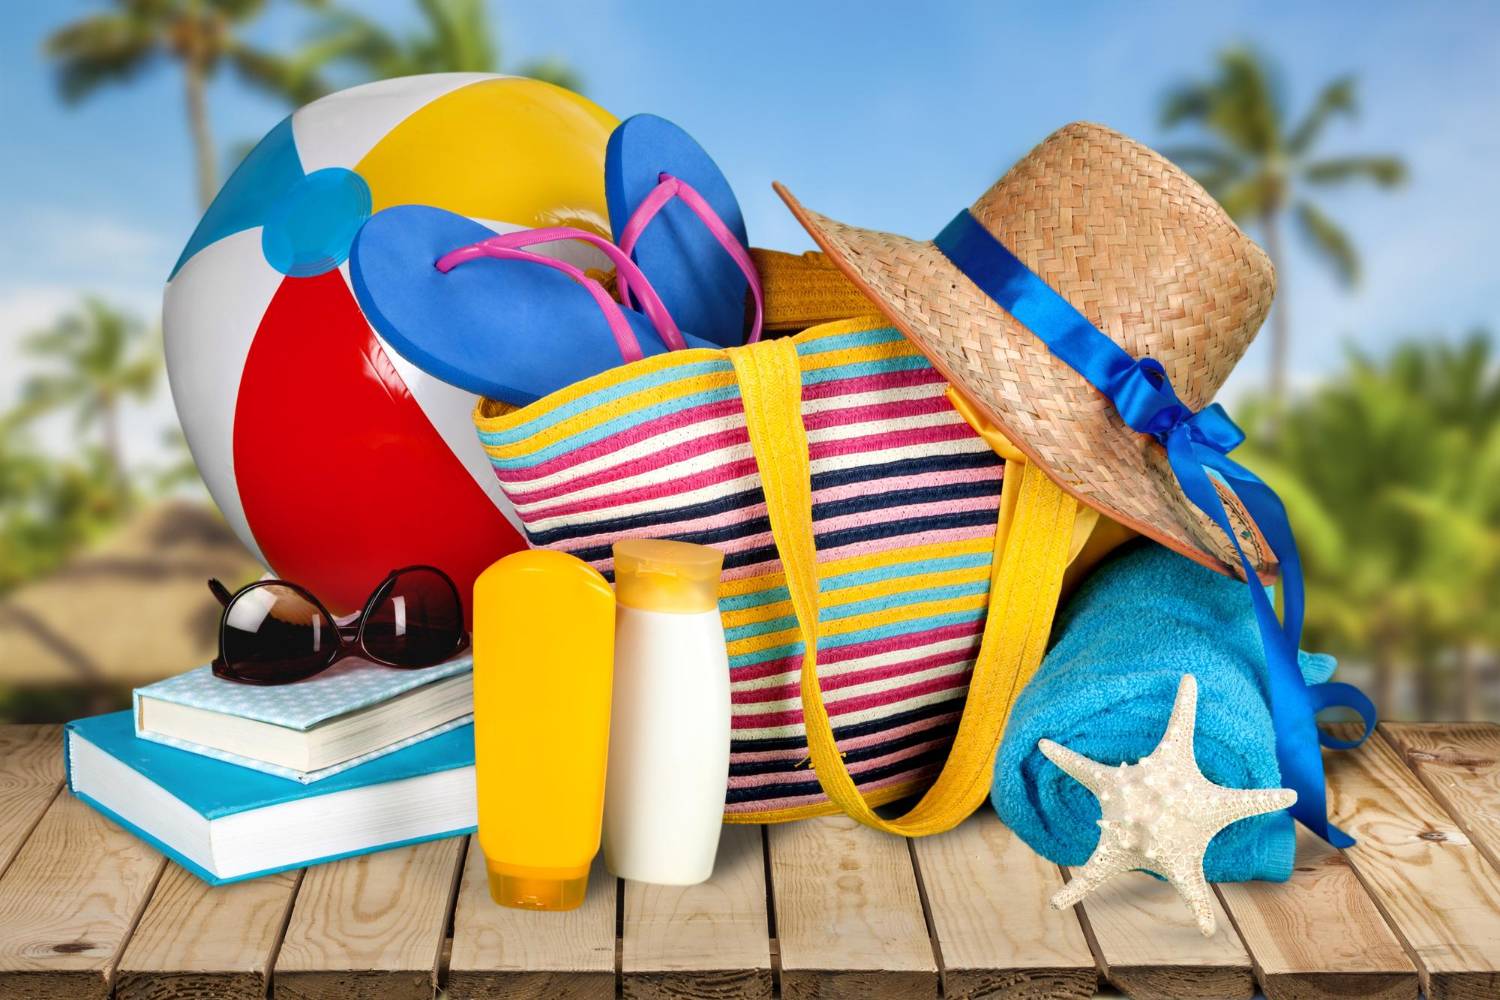 A colorful beach bag filled with flip-flops, a towel, a straw hat, sunscreen, and a starfish, next to a beach ball, books, and sunglasses. Day trip to Shell Island essentials.